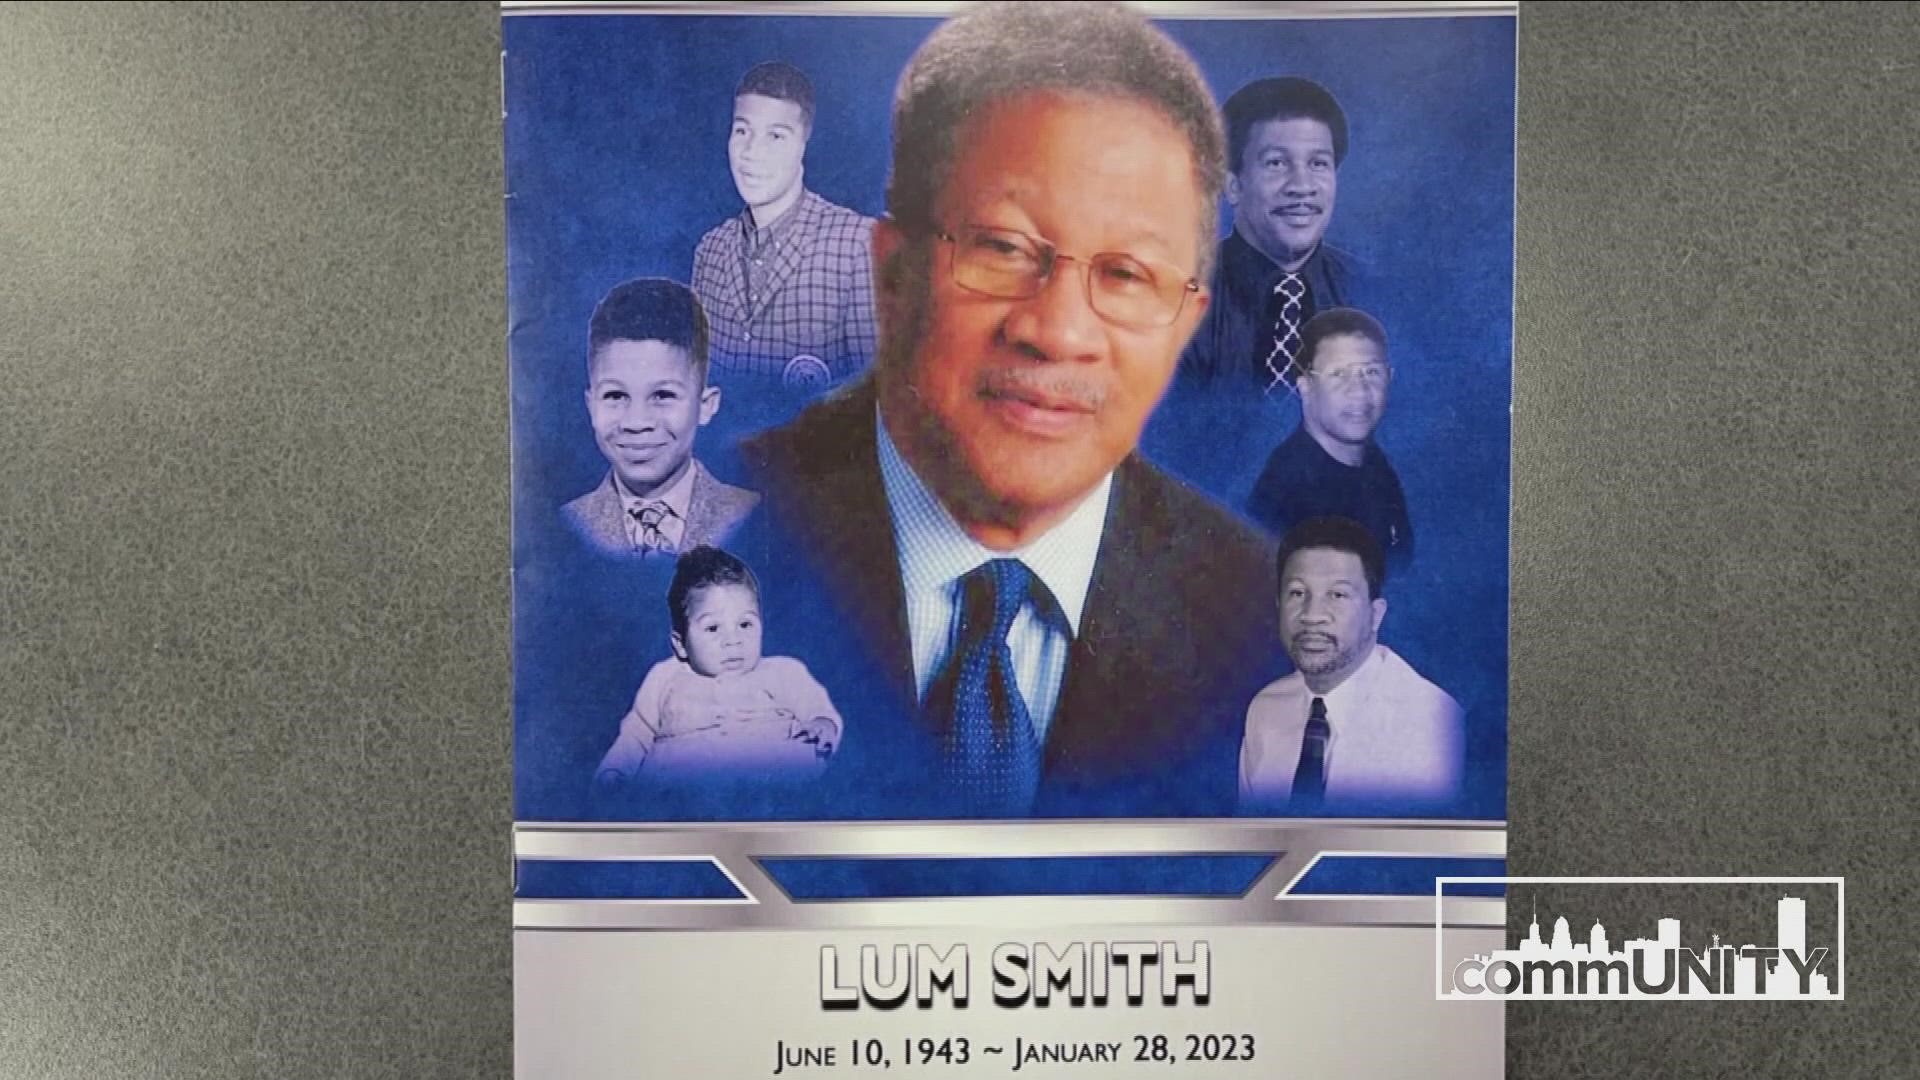 He was called a distinguished gentleman. A historian. Lum Smith died at the age of 79. He was a well respected administrator for the Buffalo Public School district.